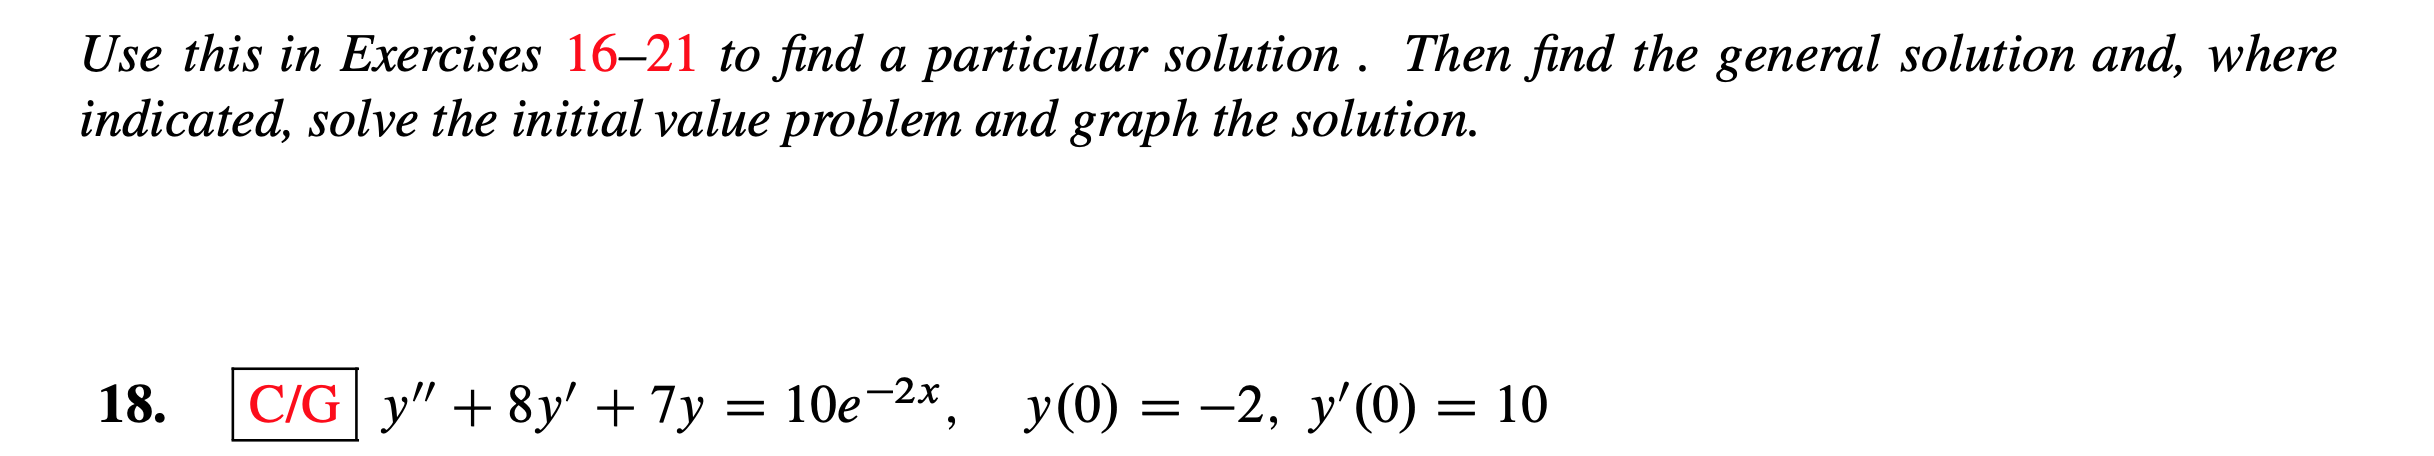 Use this in Exercises 16-21 to find a particular solution . Then find the general solution and, where
indicated, solve the initial value problem and graph the solution.
у(0) — —2, у'(0) — 1
De 2*,
C/G y" 8y7y
18.
= 10e-2x
